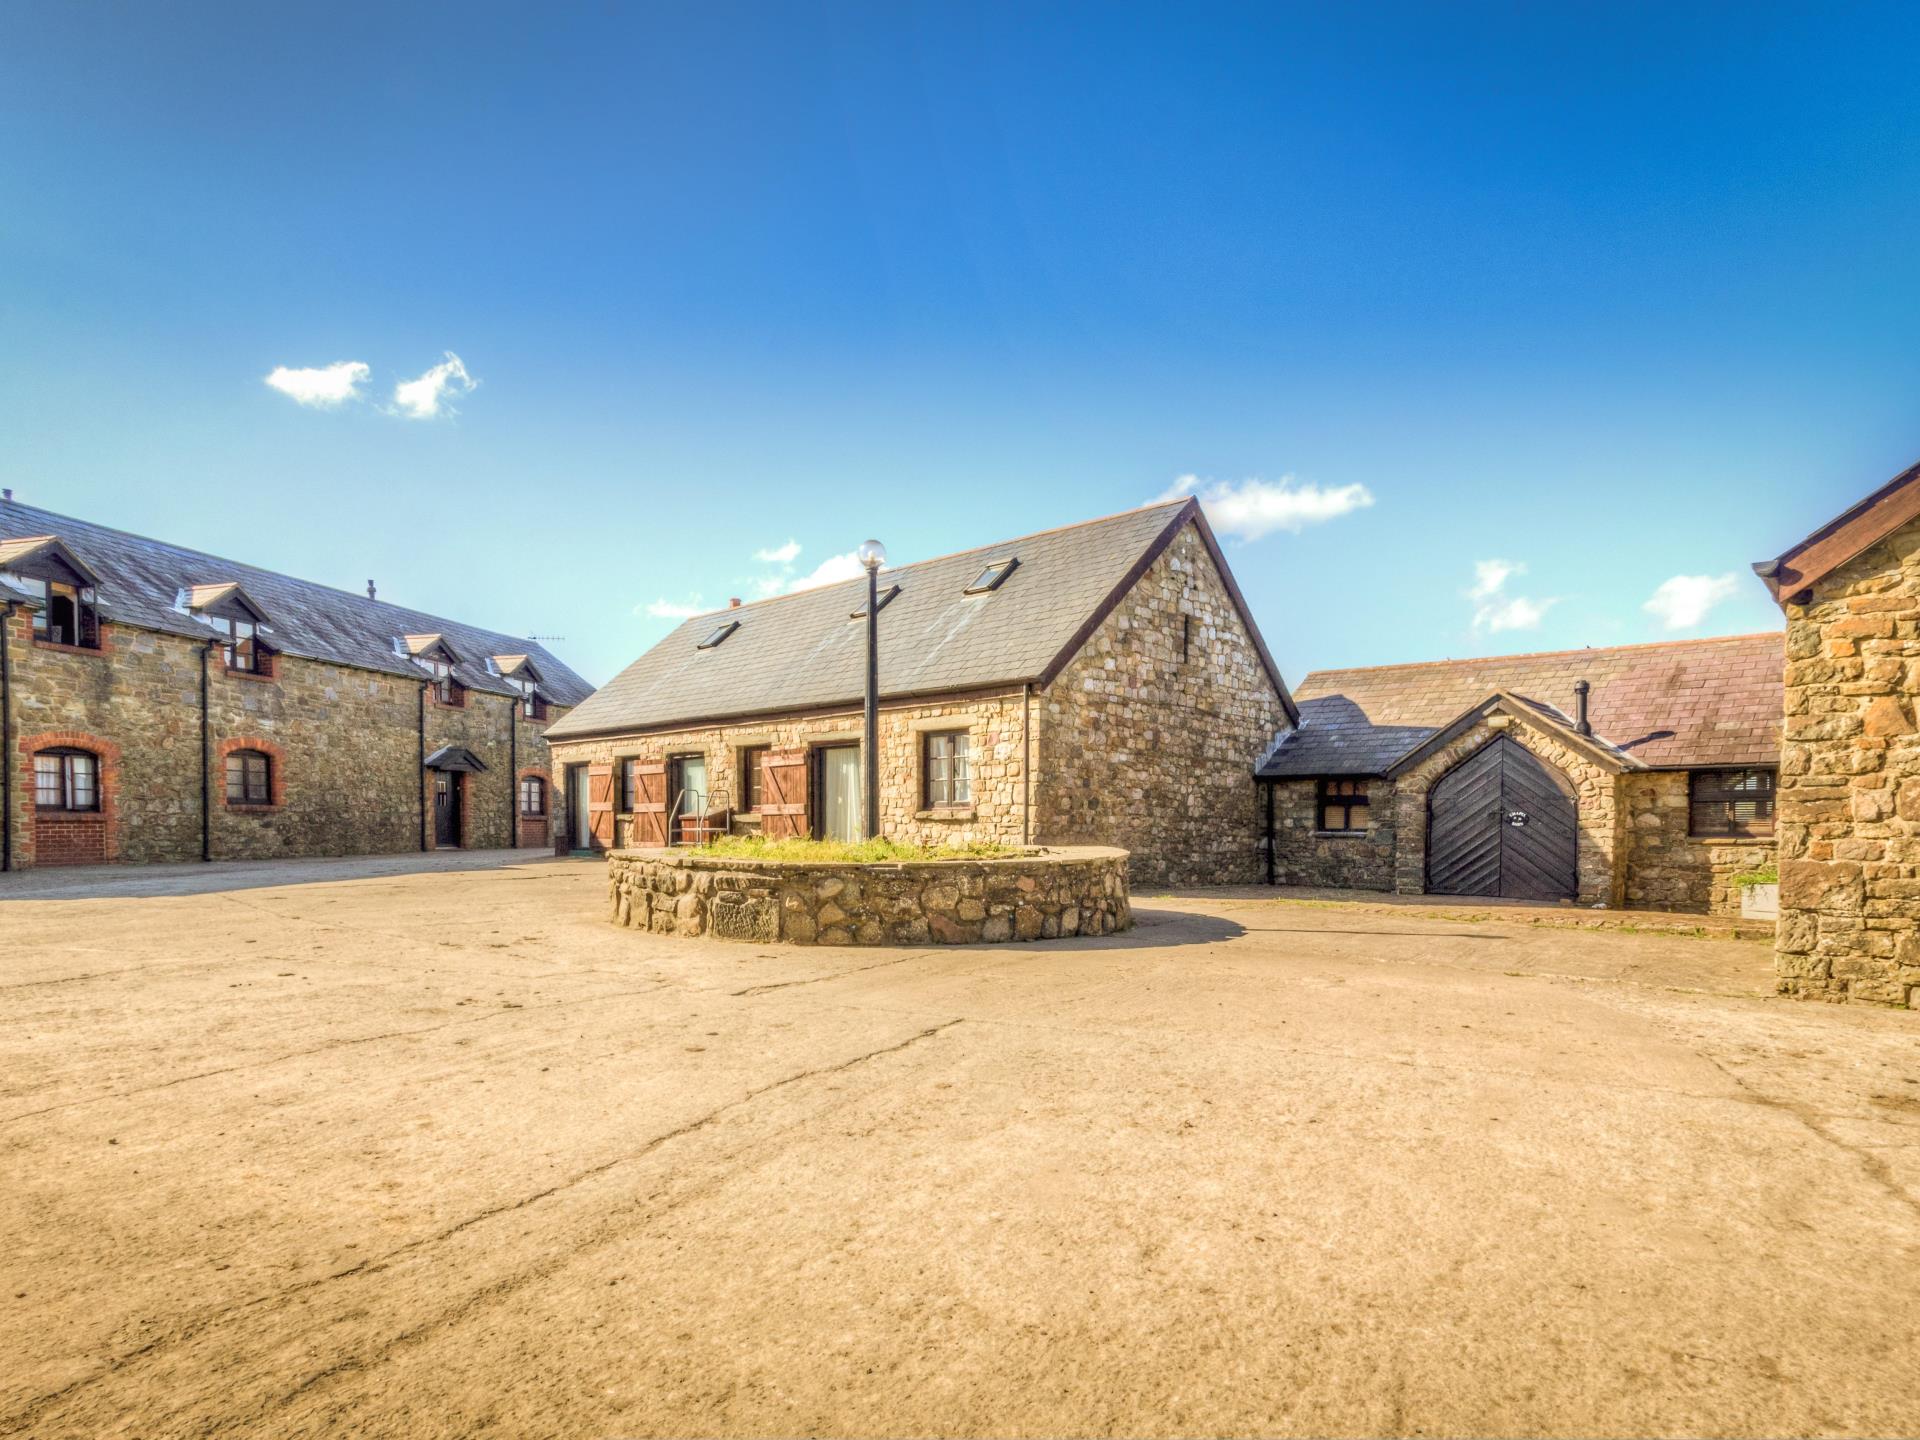 Nine lovely self-catering cottages to choose from